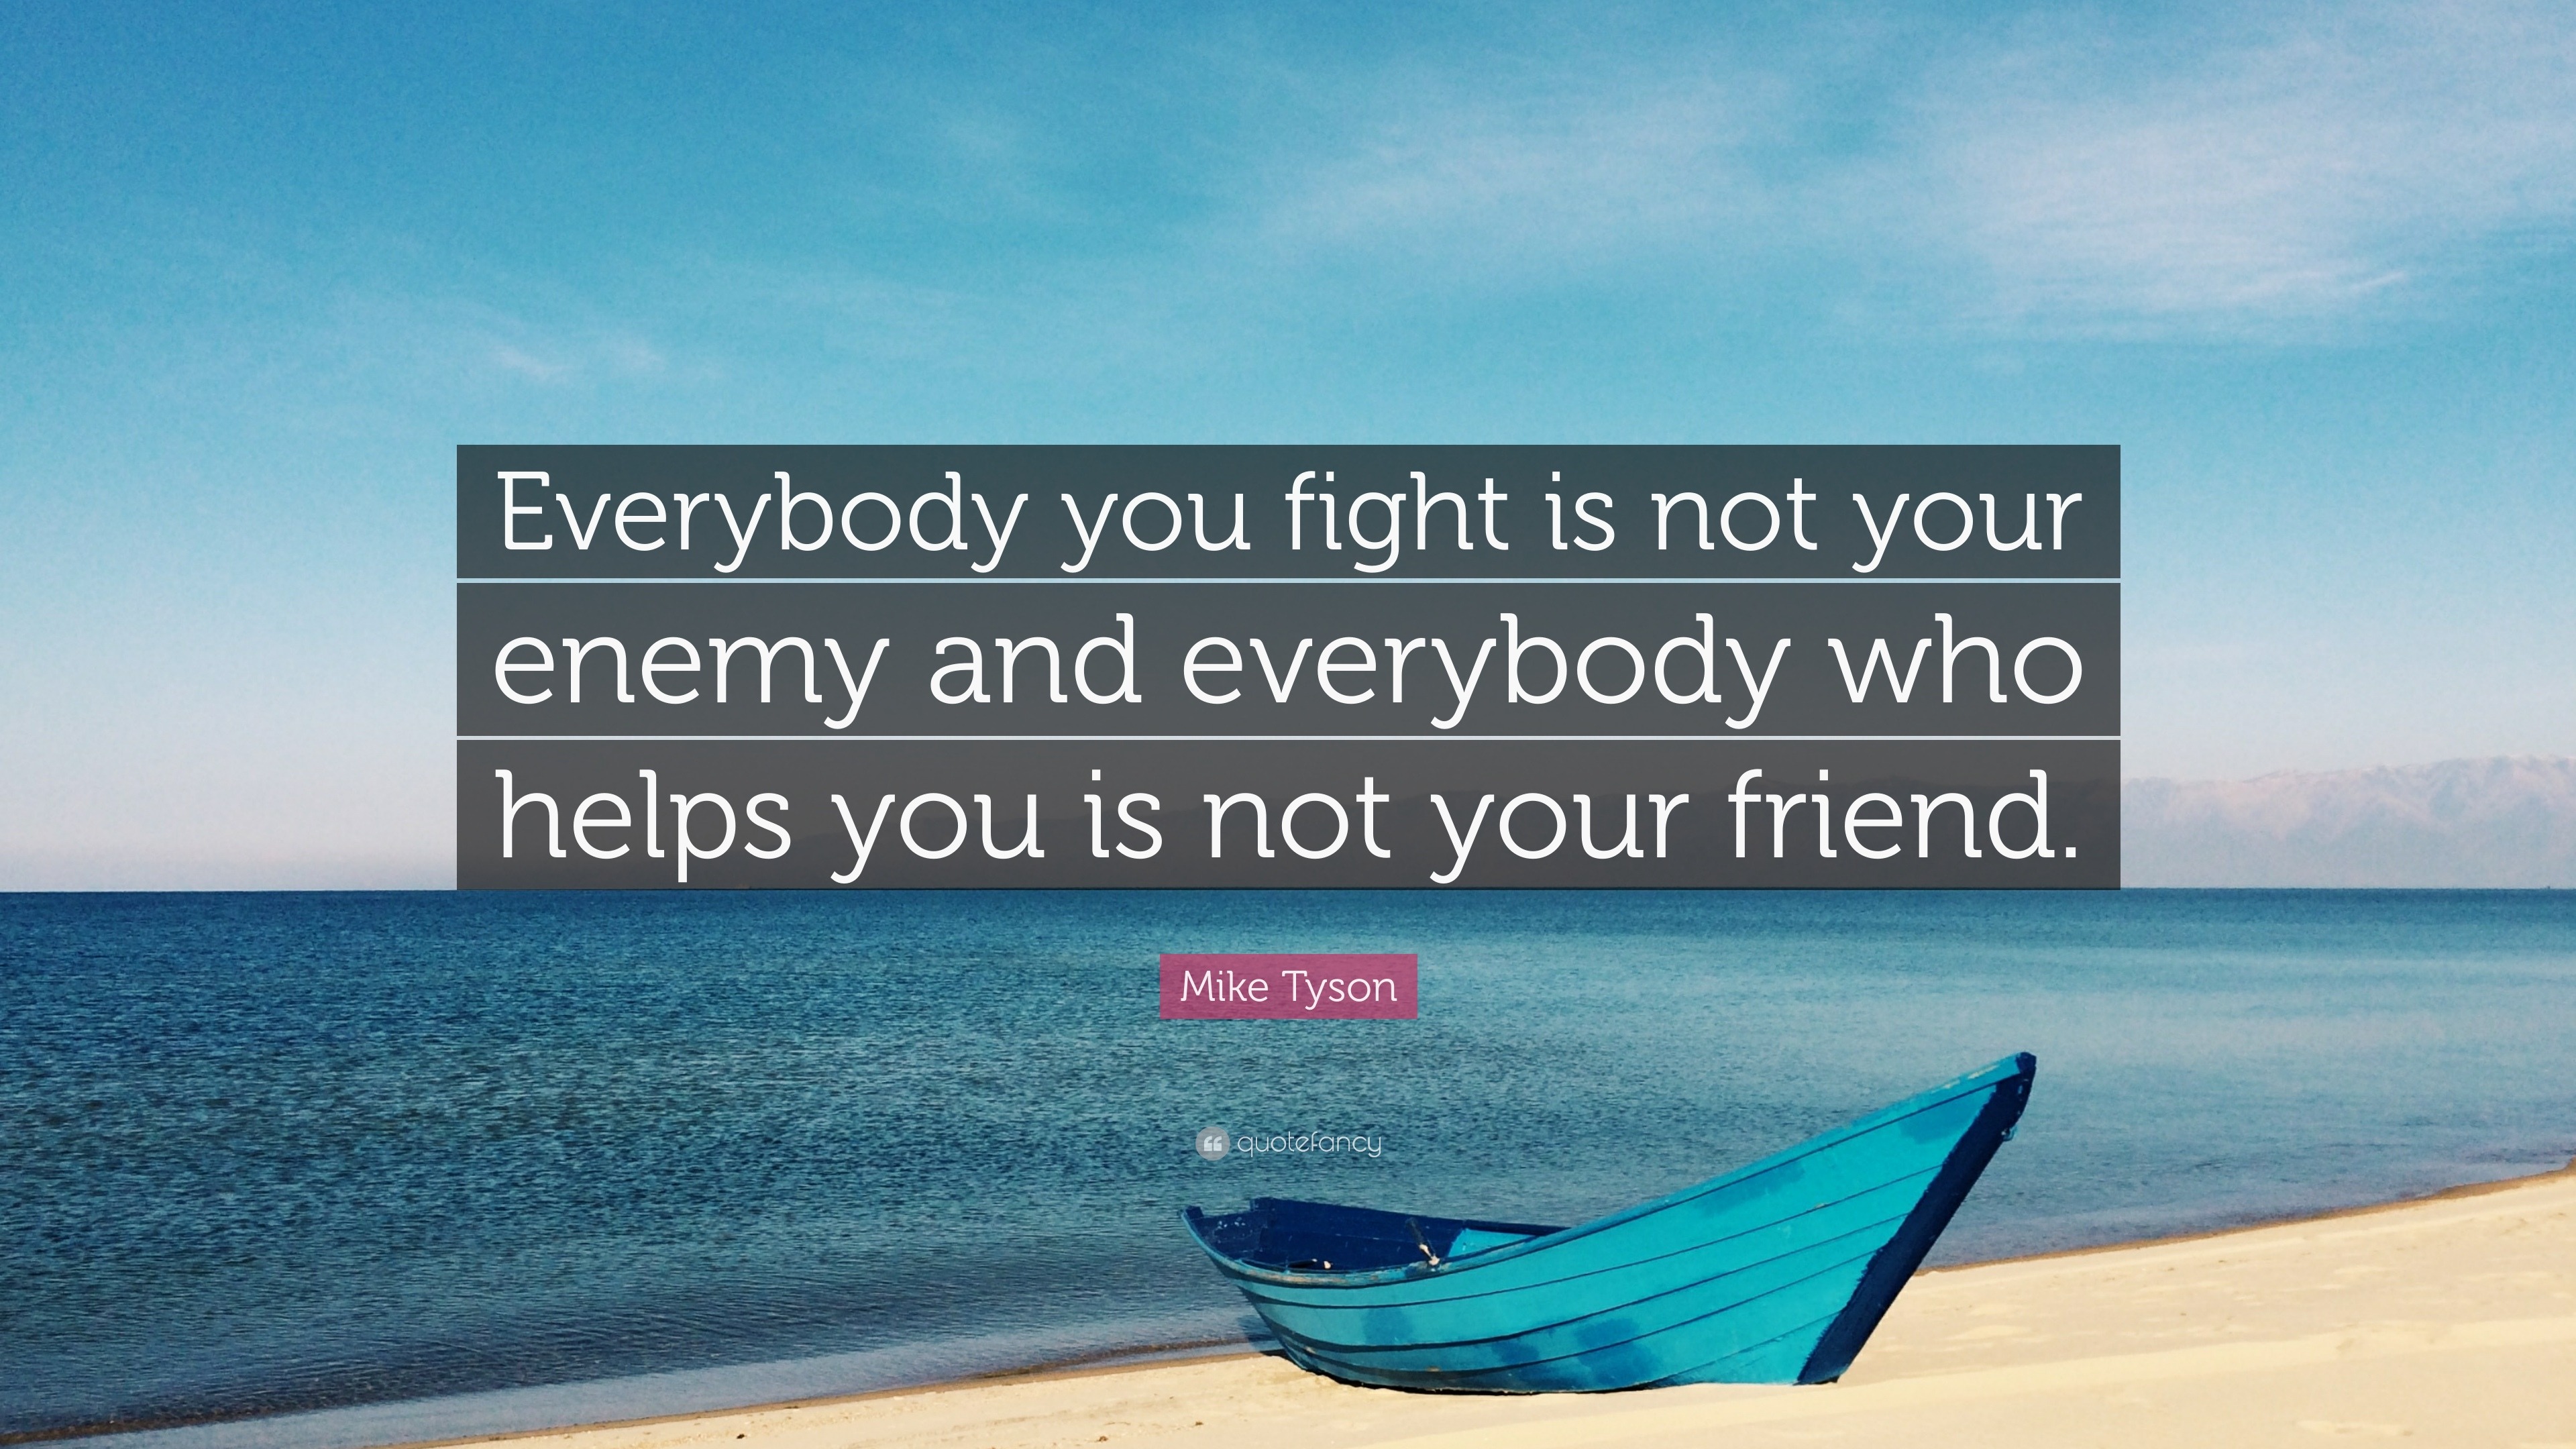 Mike Tyson Quote: “Everybody you fight is not your enemy and everybody who helps you ...3840 x 2160